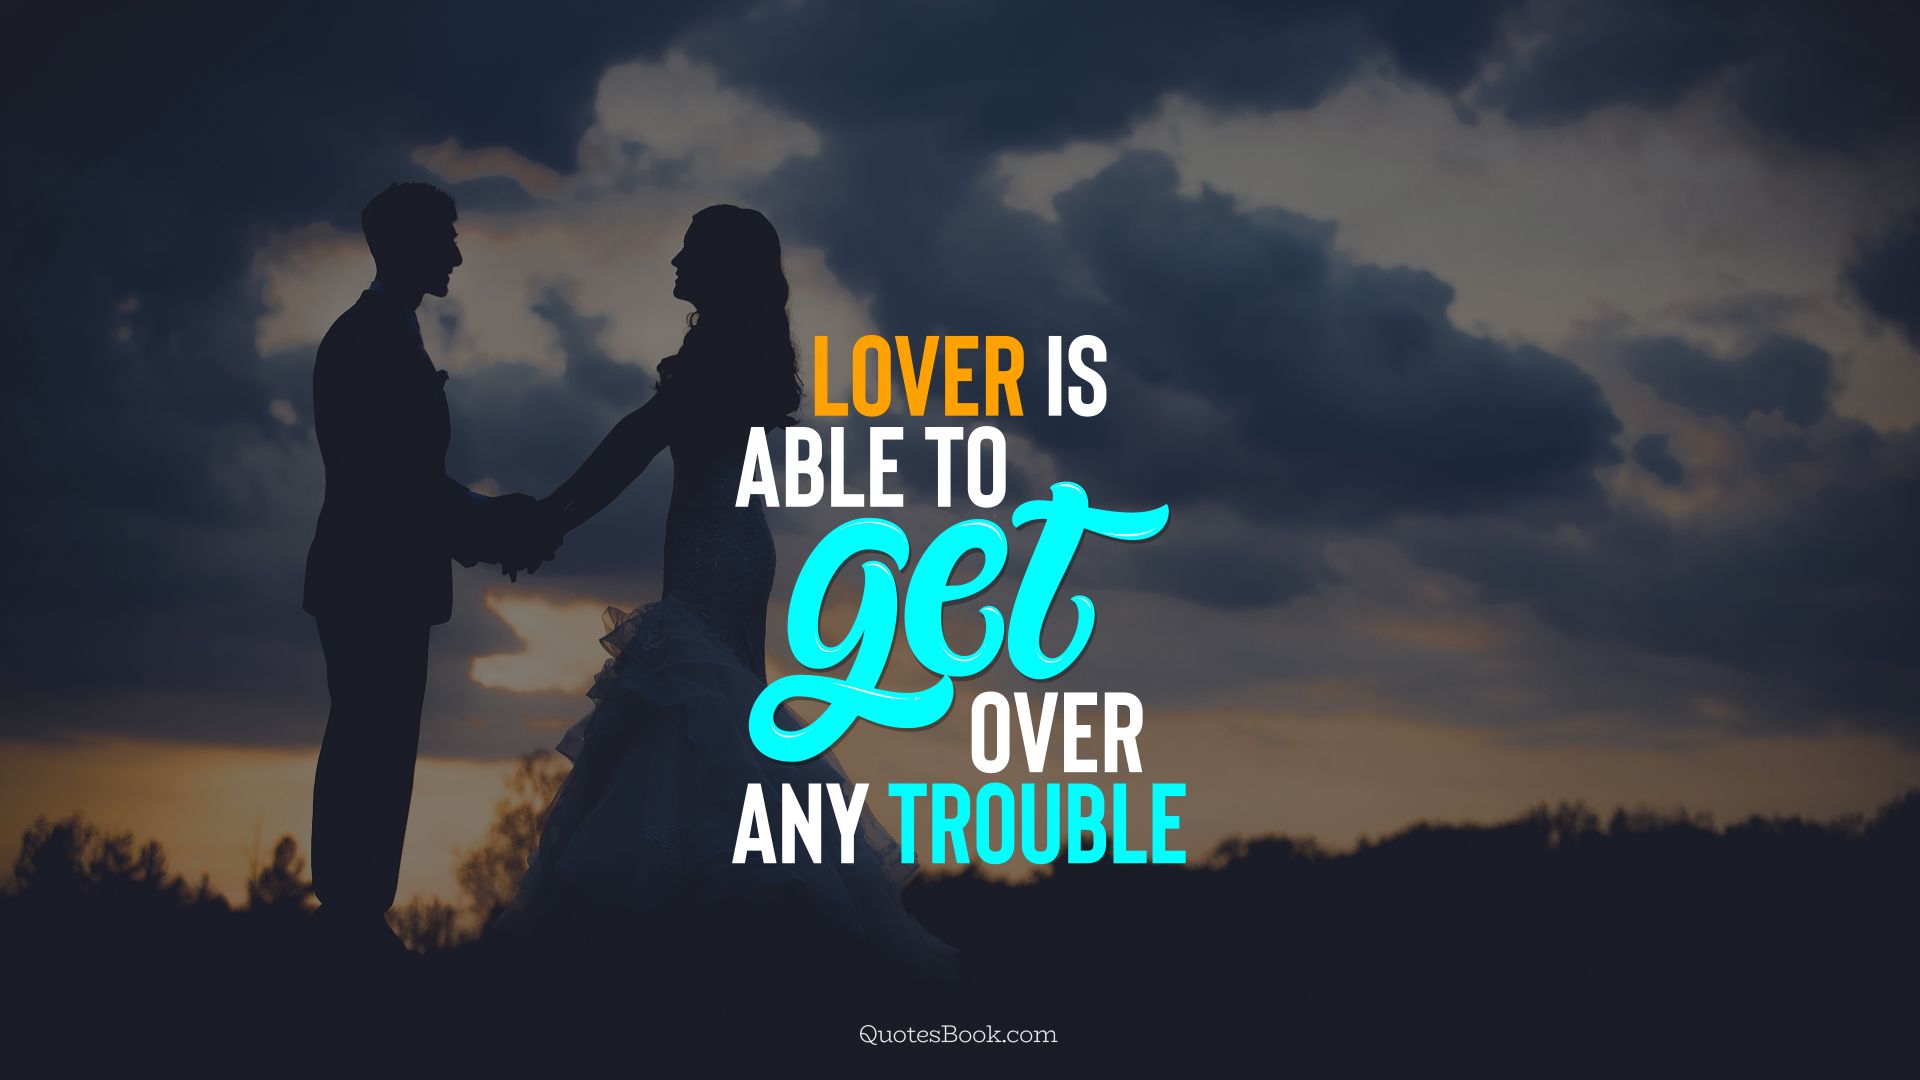 Lover is able to get over any trouble. - Quote by QuotesBook